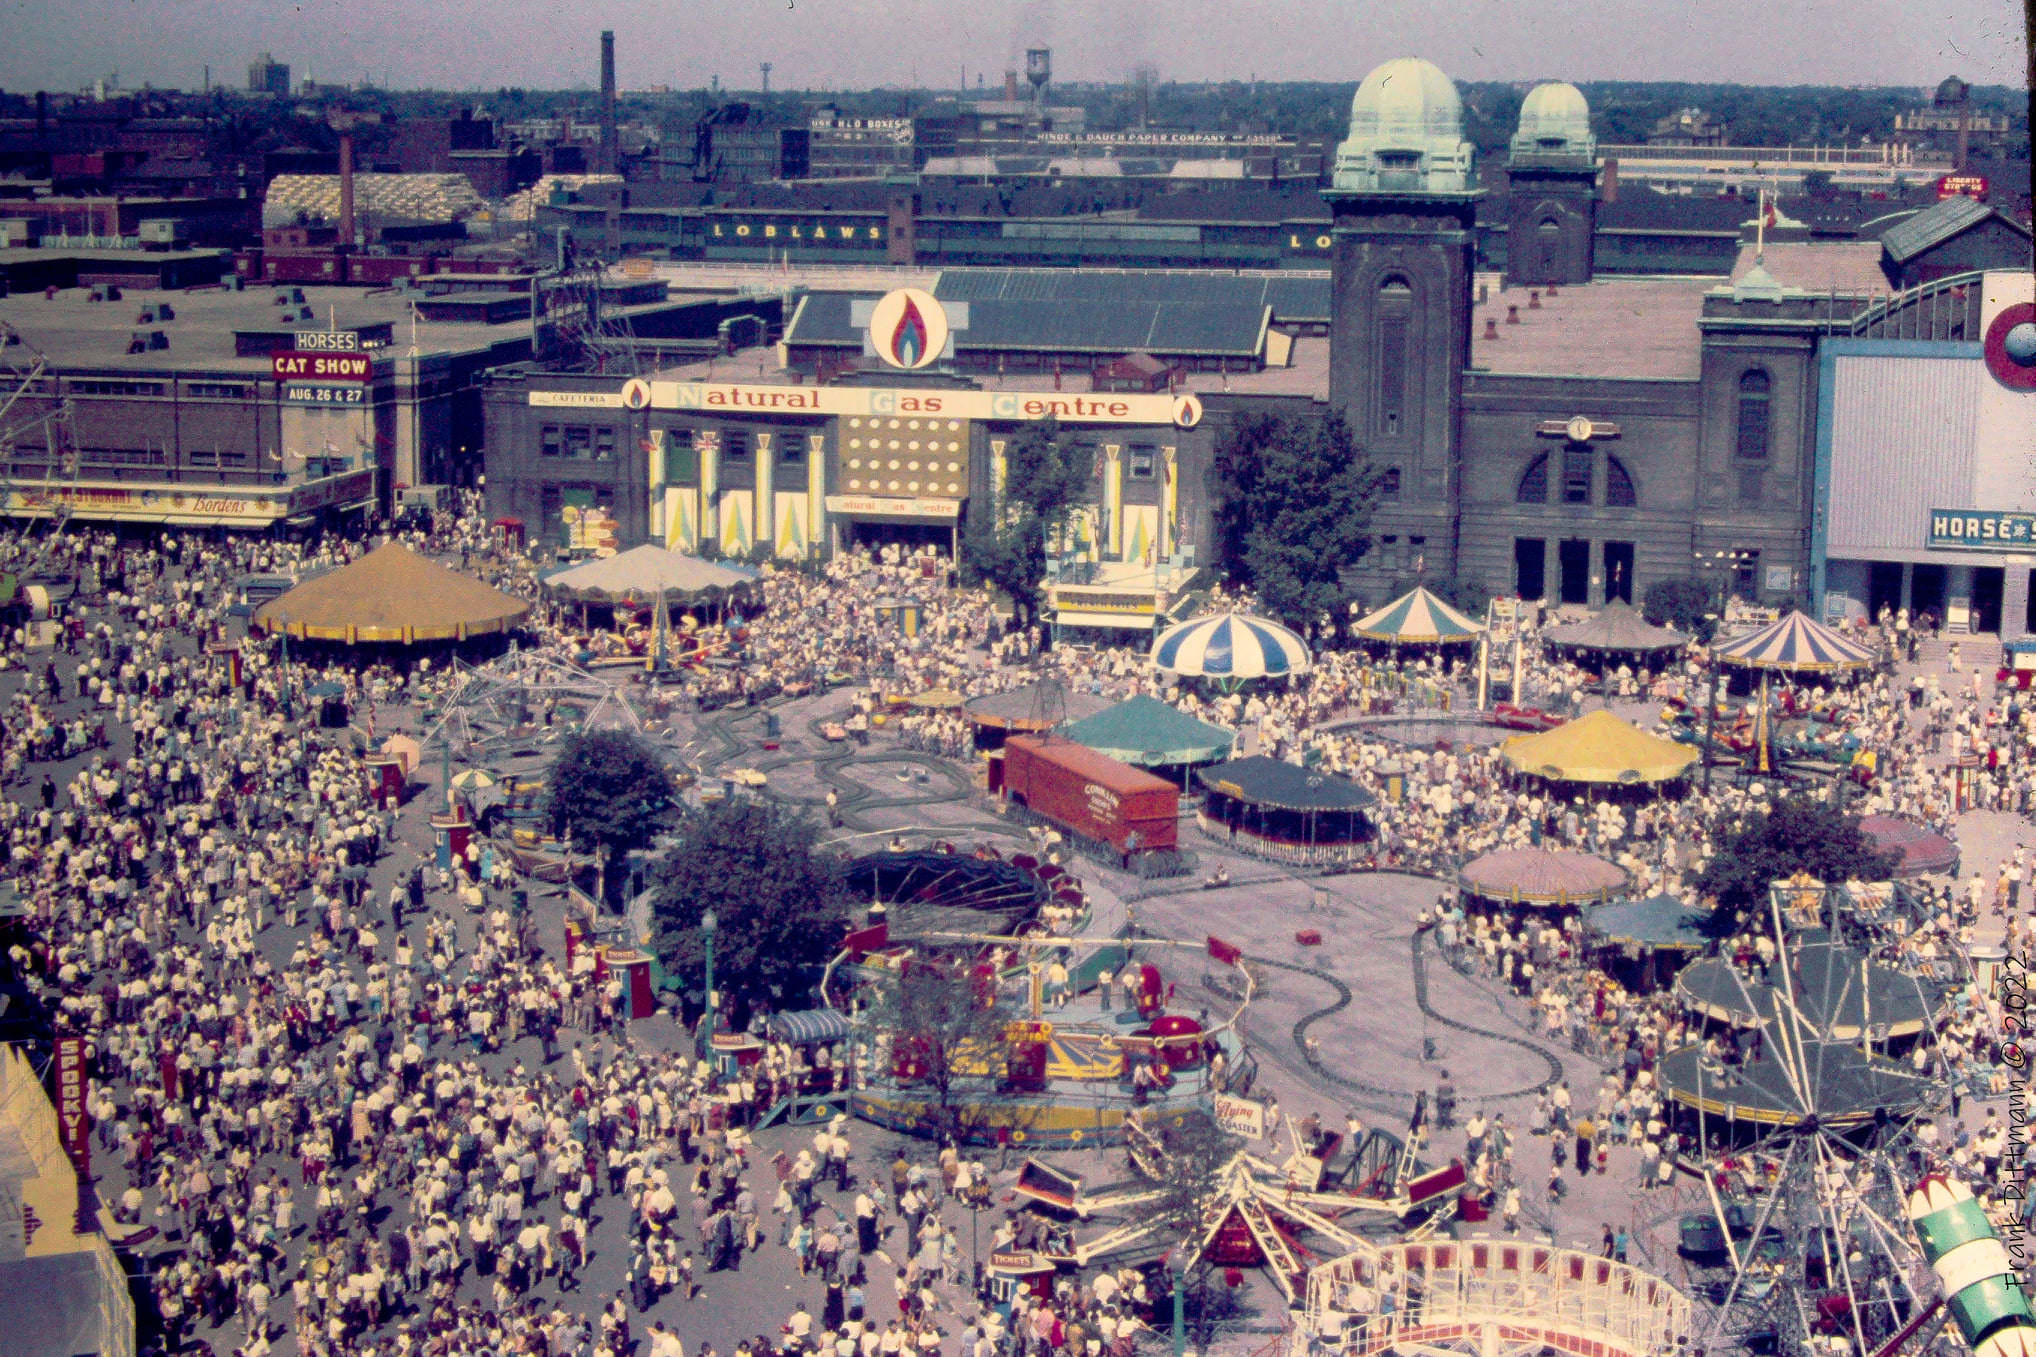 A different view from the CNE Shell Tower than I shared a year or so ago. This time, looking north. From a Kodachrome slide, shot by my father in the early 1960's